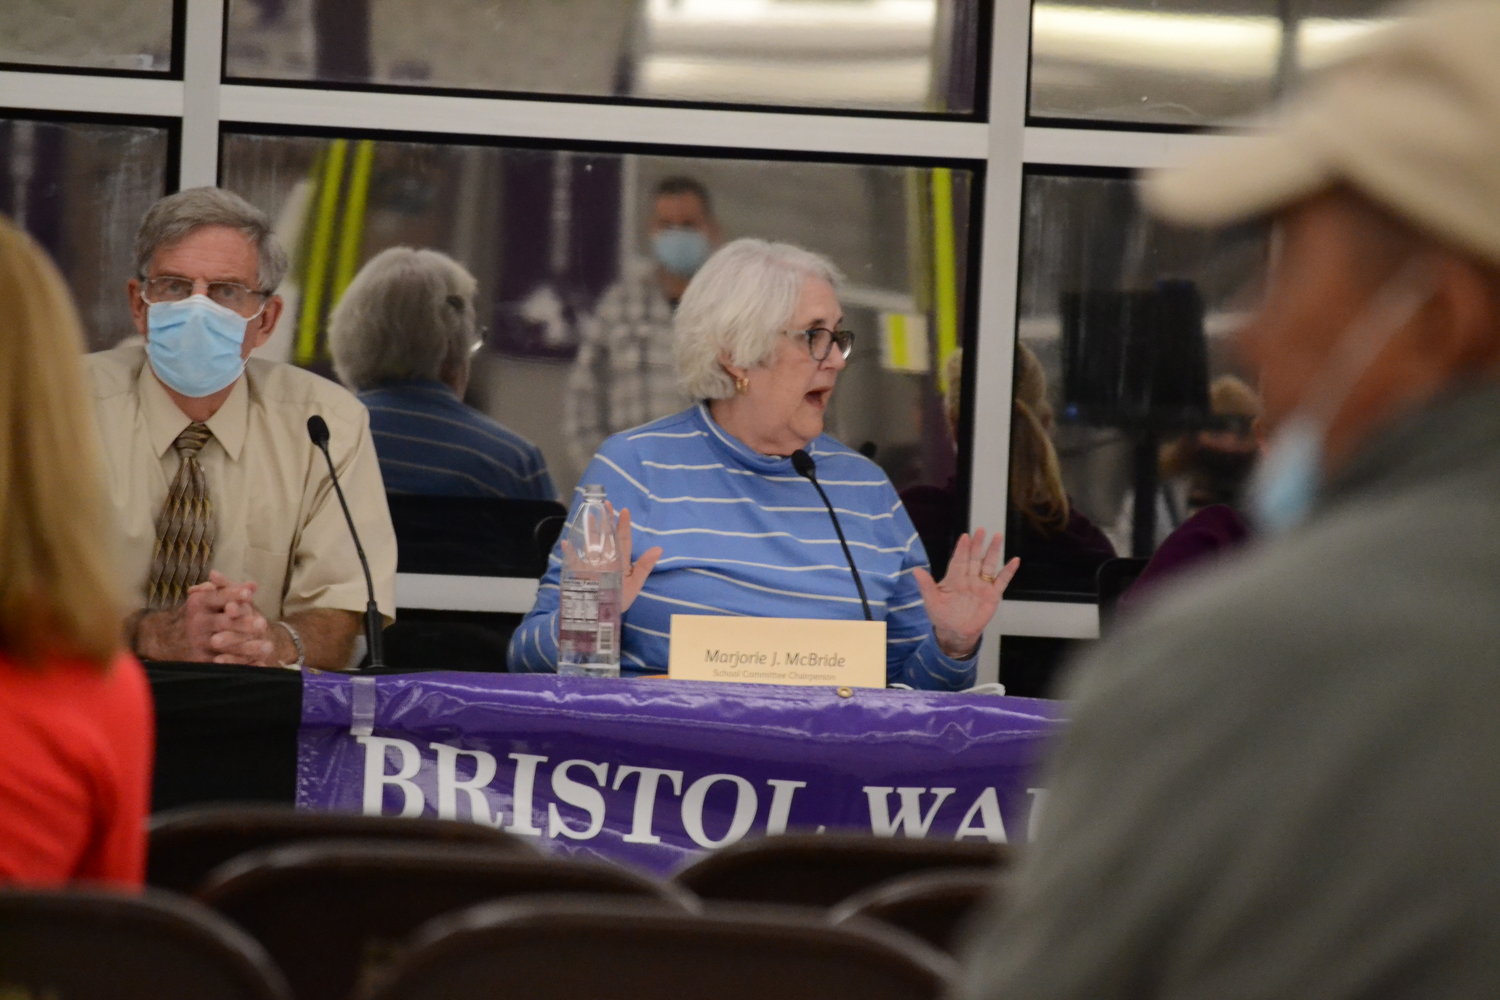 School Committee Chairperson Marjorie McBride shouts for order in the room after questioning of the proposed vendor for professional development in the district descended into chaos Monday night. She would vote to deny the $7,000 expenditure shortly after.